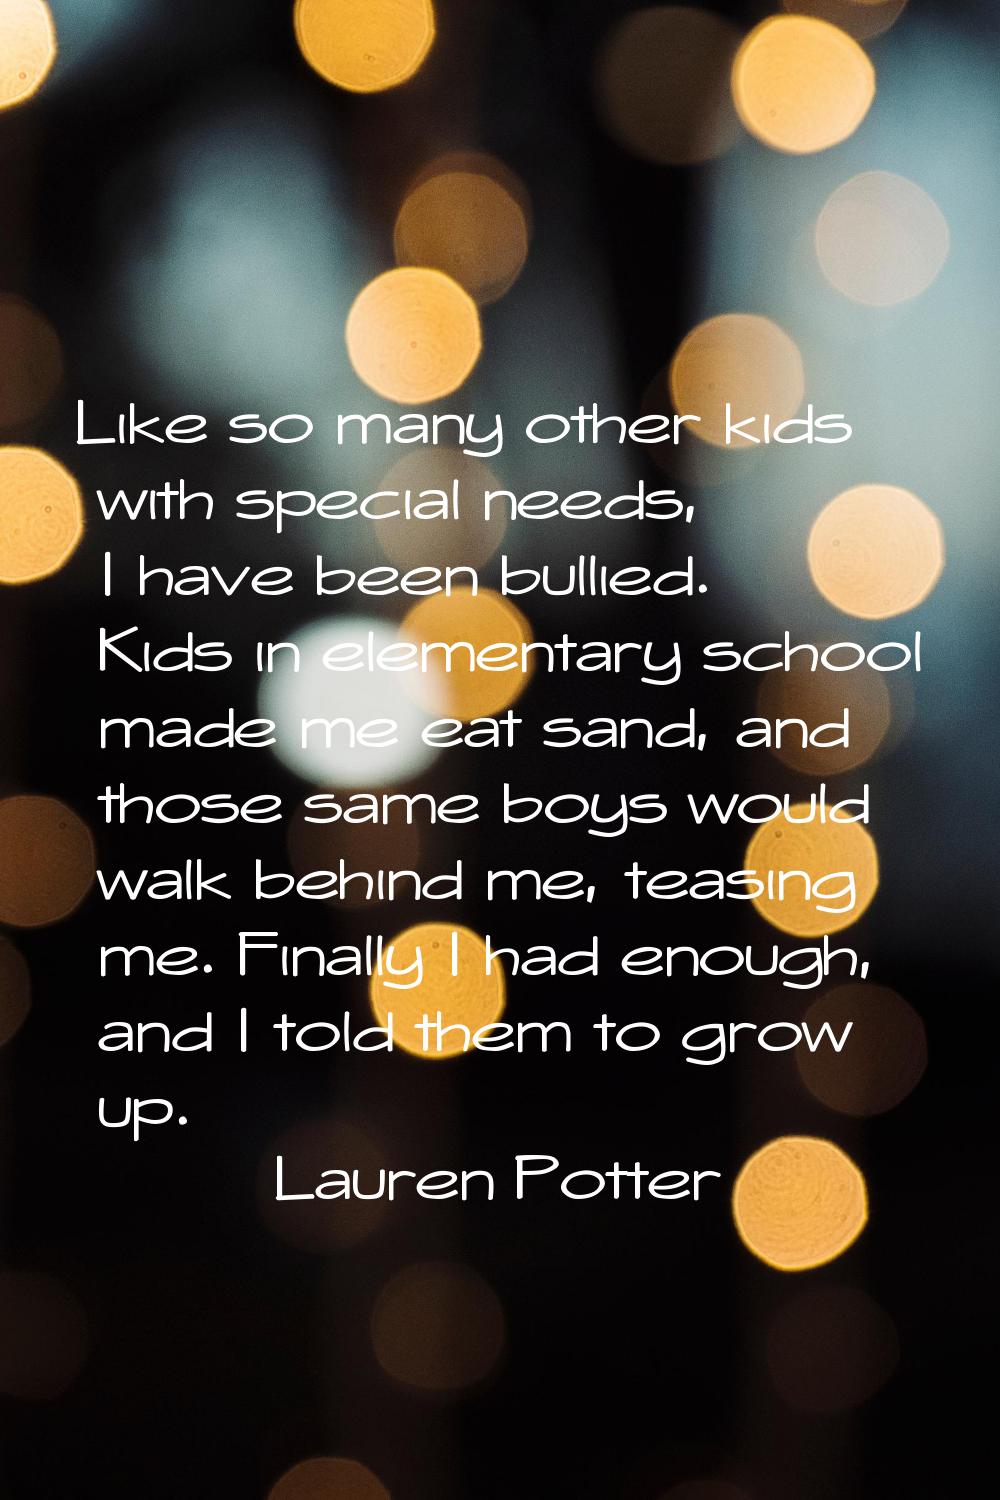 Like so many other kids with special needs, I have been bullied. Kids in elementary school made me 